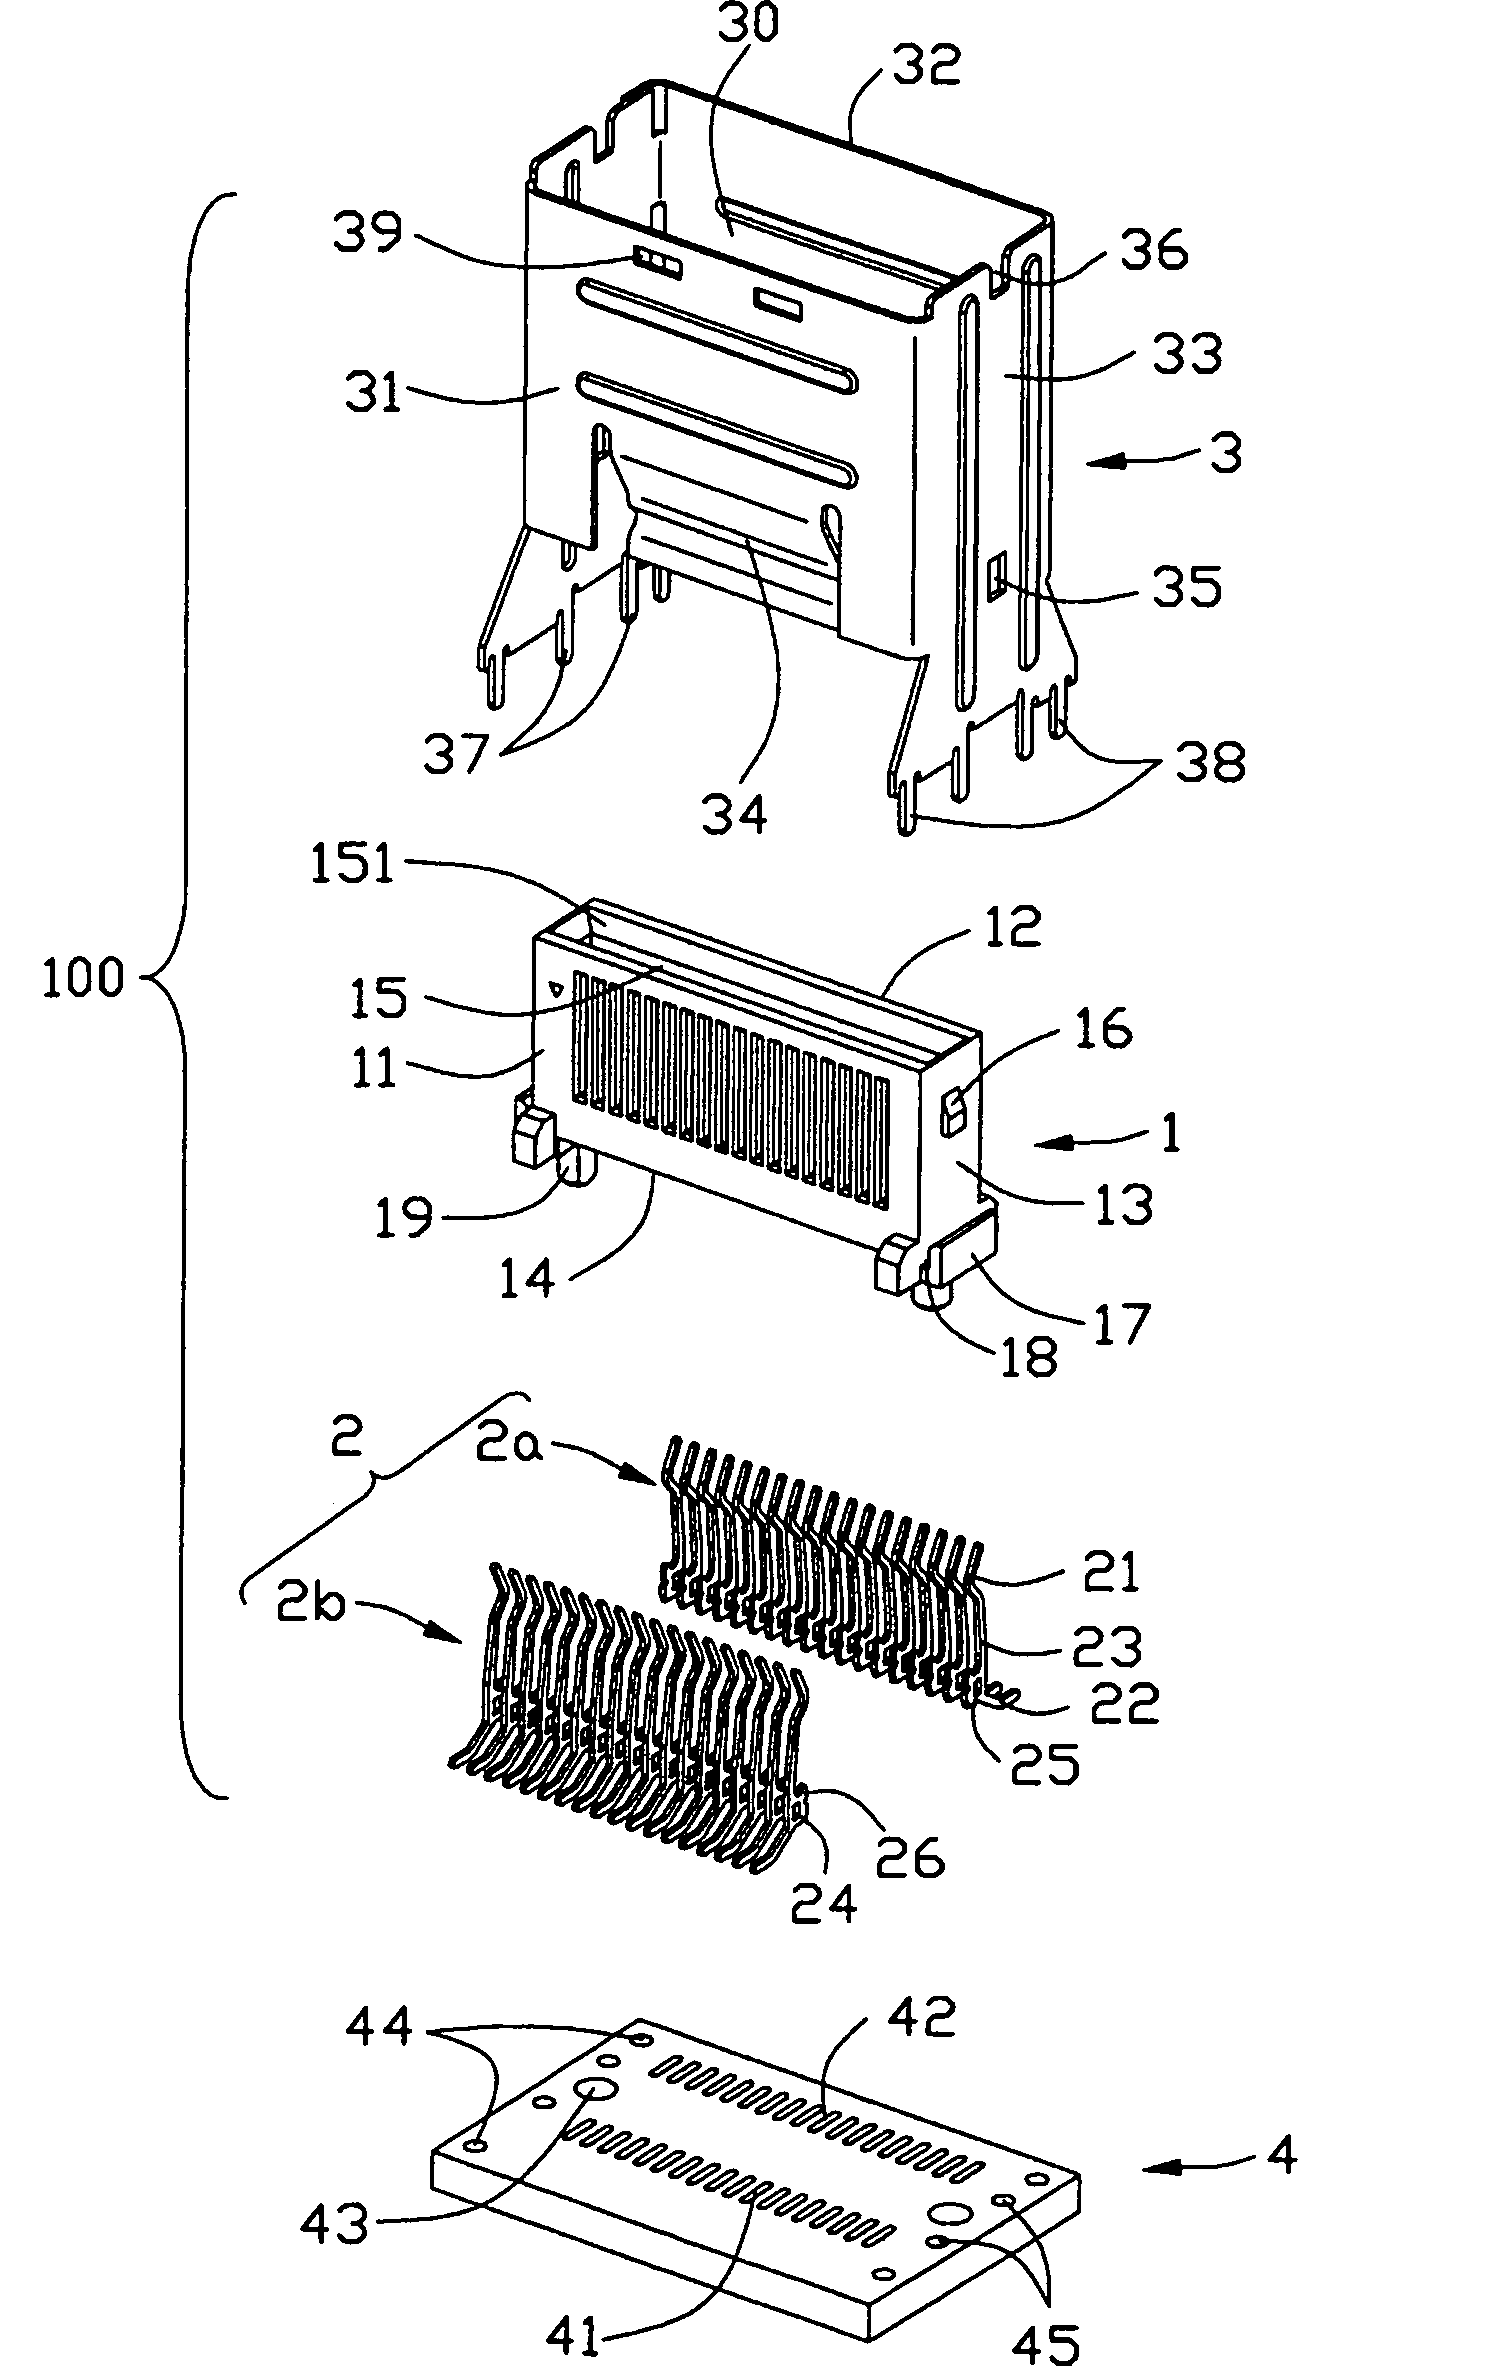 Electrical connector with shell